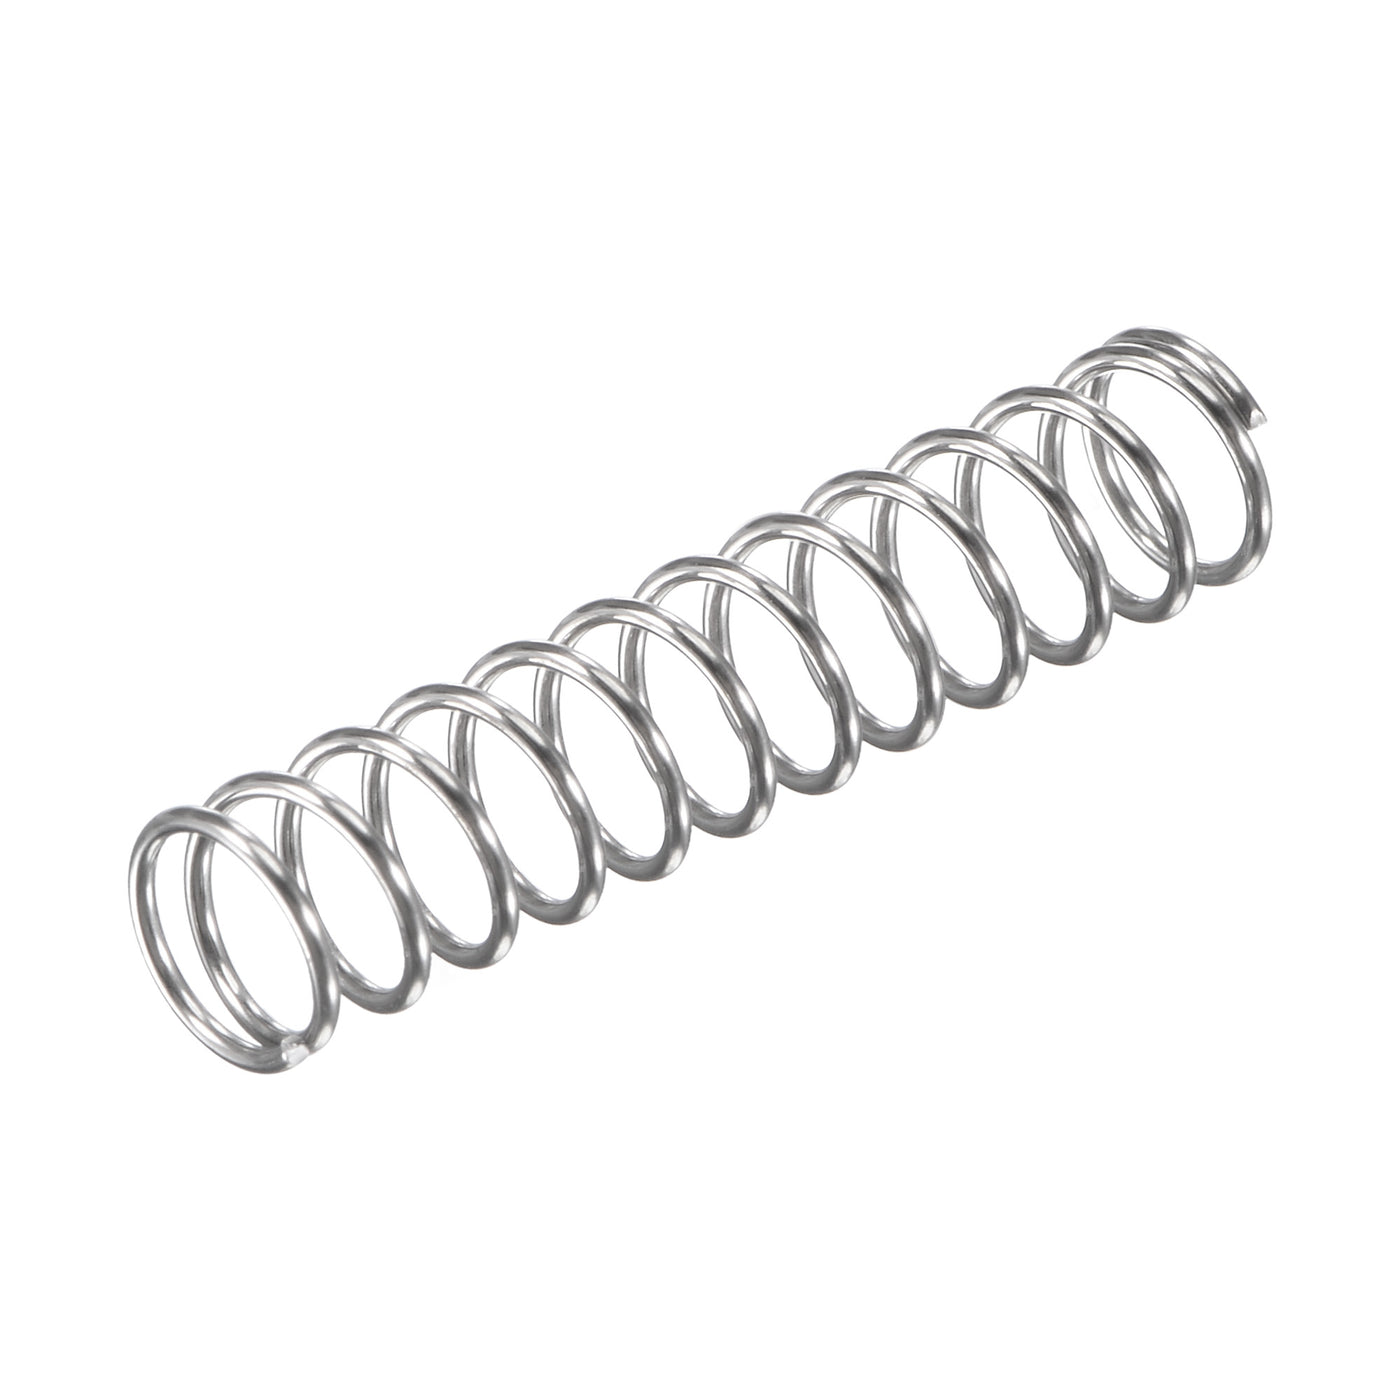 uxcell Uxcell 8mmx0.8mmx40mm 304 Stainless Steel Compression Spring 11.8N Load Capacity 10pcs